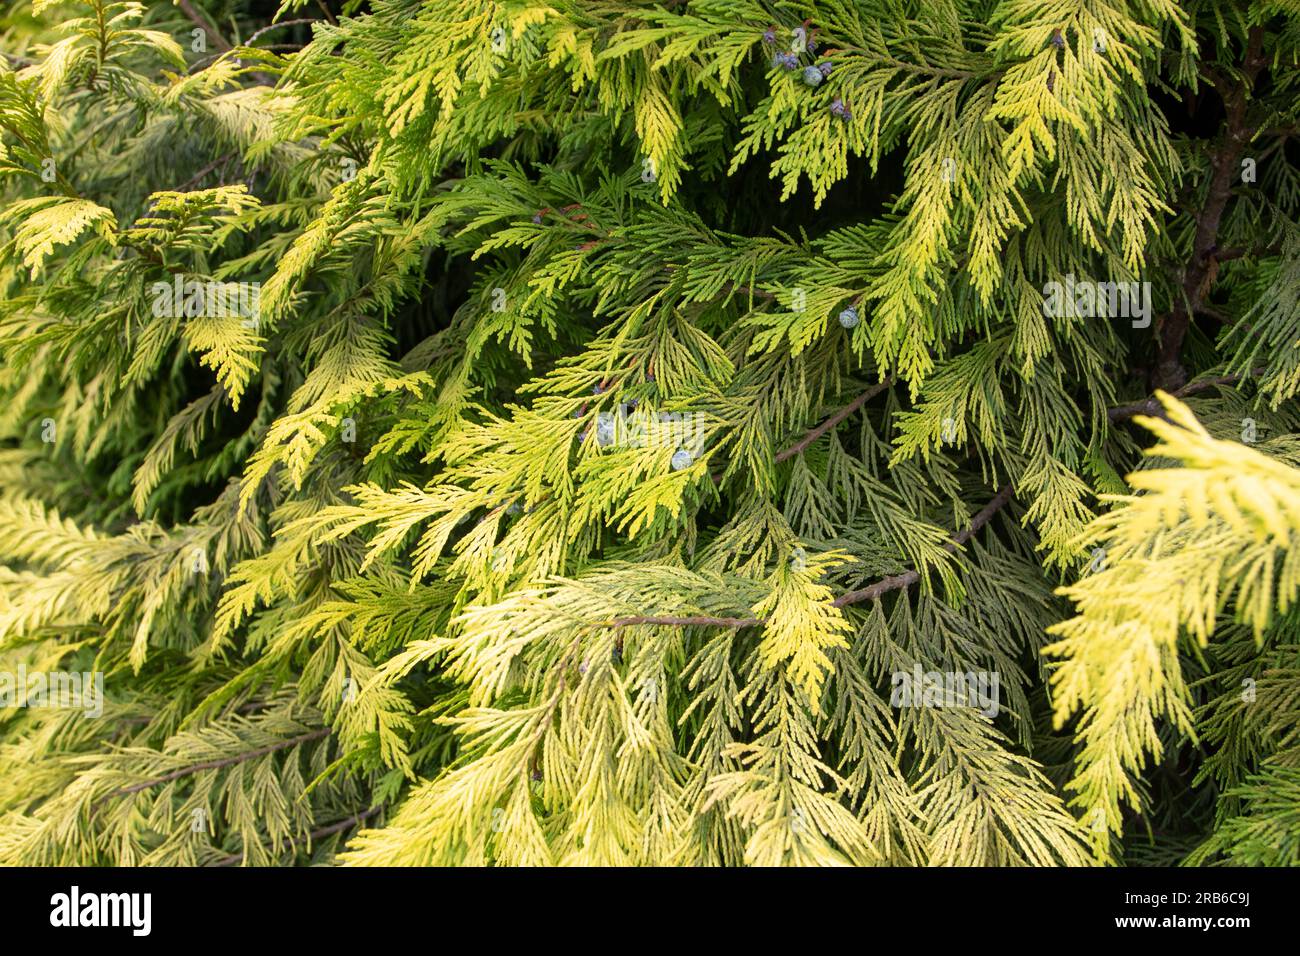 Chamaecyparis lawsoniana or Port Orford cedar or Lawson cypress coniferous tree. Evergreen ornamental plant with golden green leaves and blue cones. Stock Photo